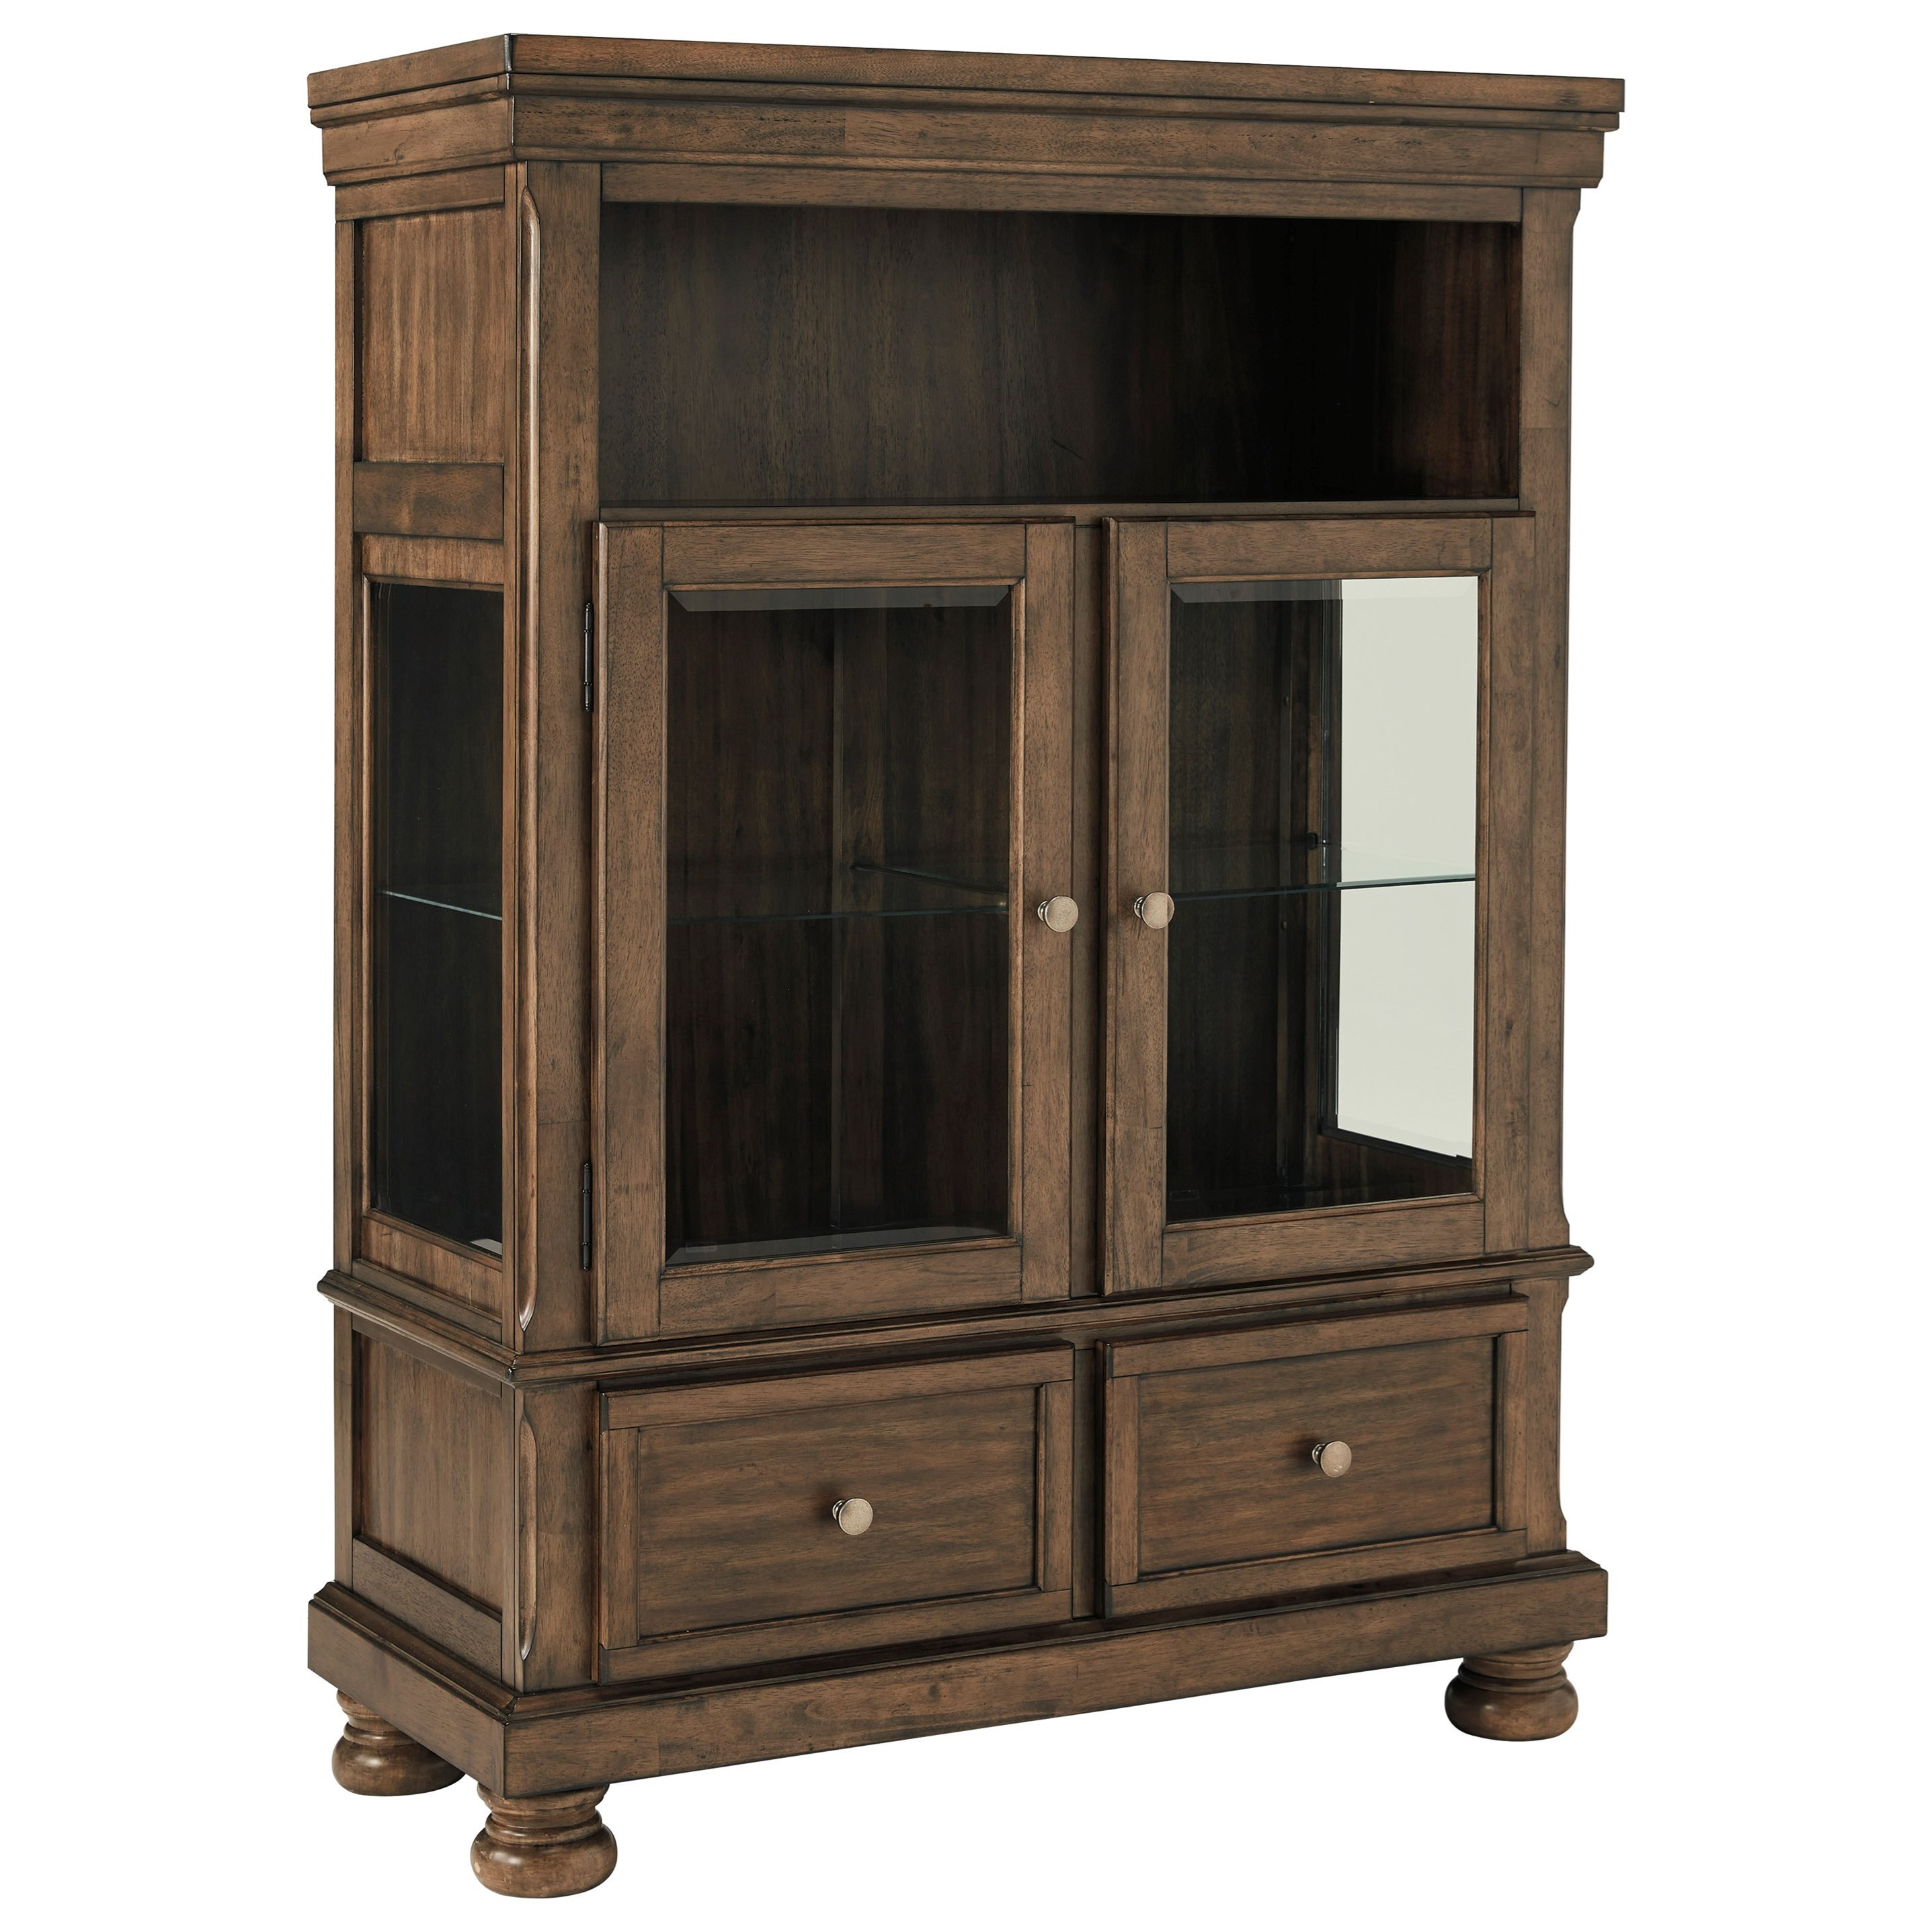 Top 20 ashley Furniture Curio Cabinet - Best Collections ...